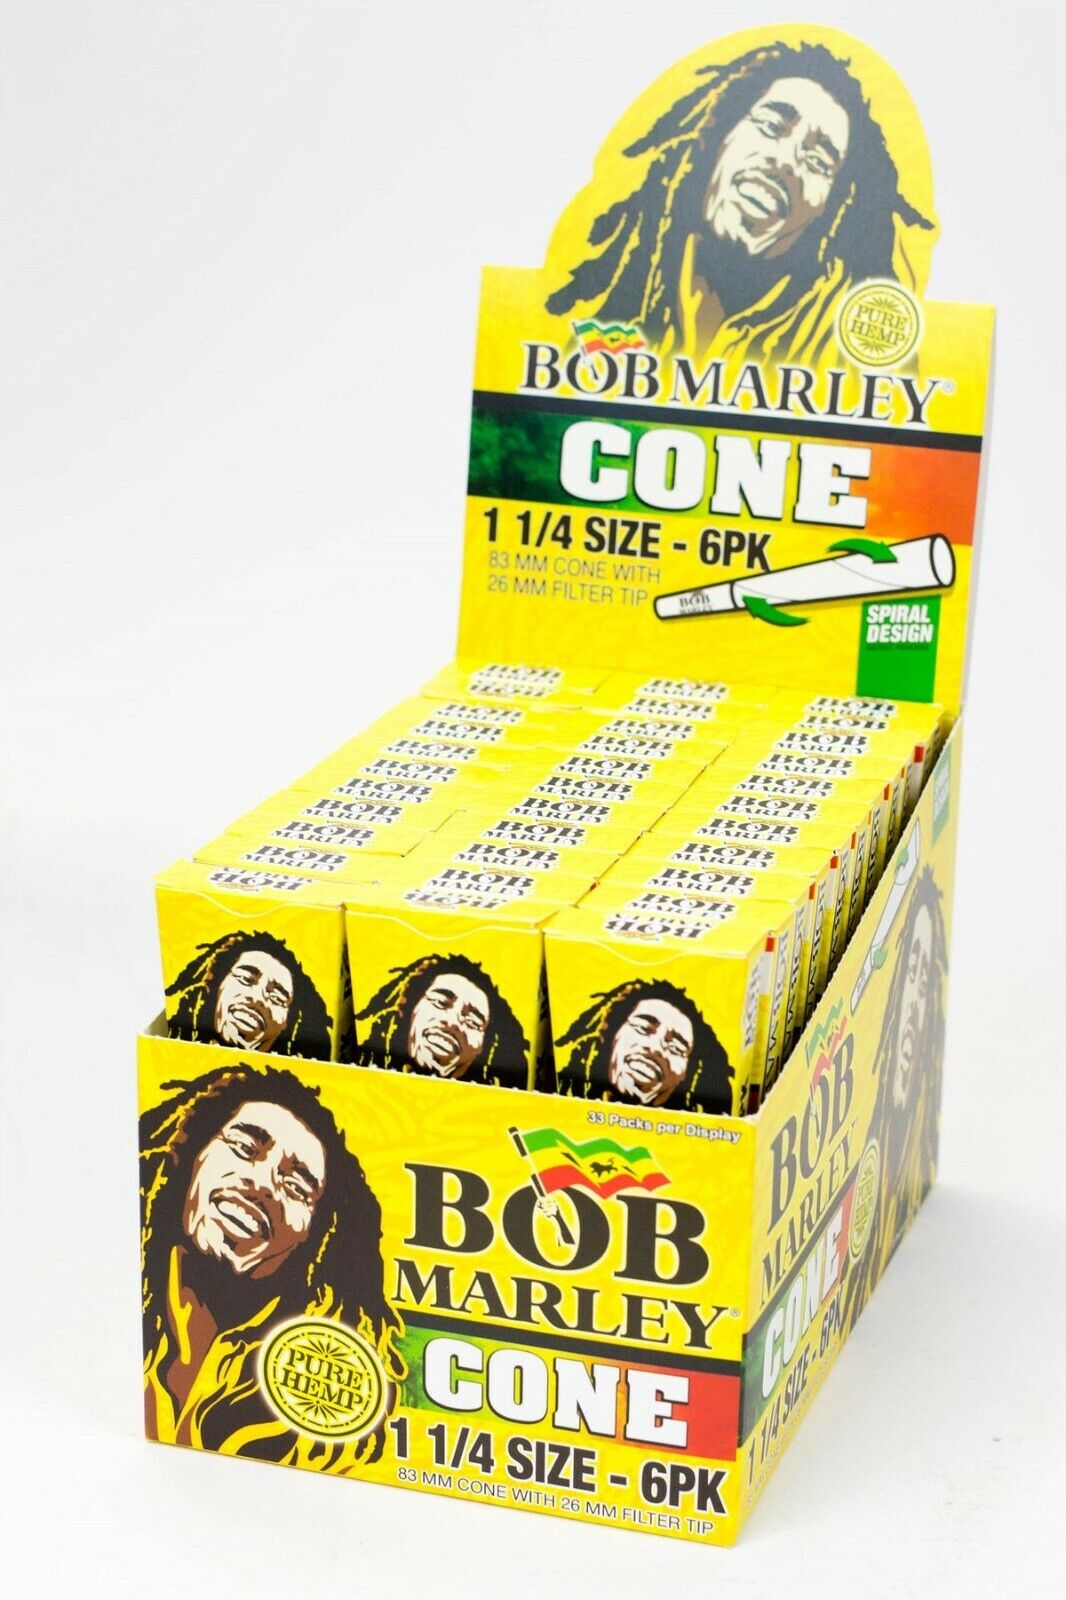 Bob Marley 1 1/4  6PK Pure hemp Pre-rolled 83mm cone with 26mm tips Box of 33 